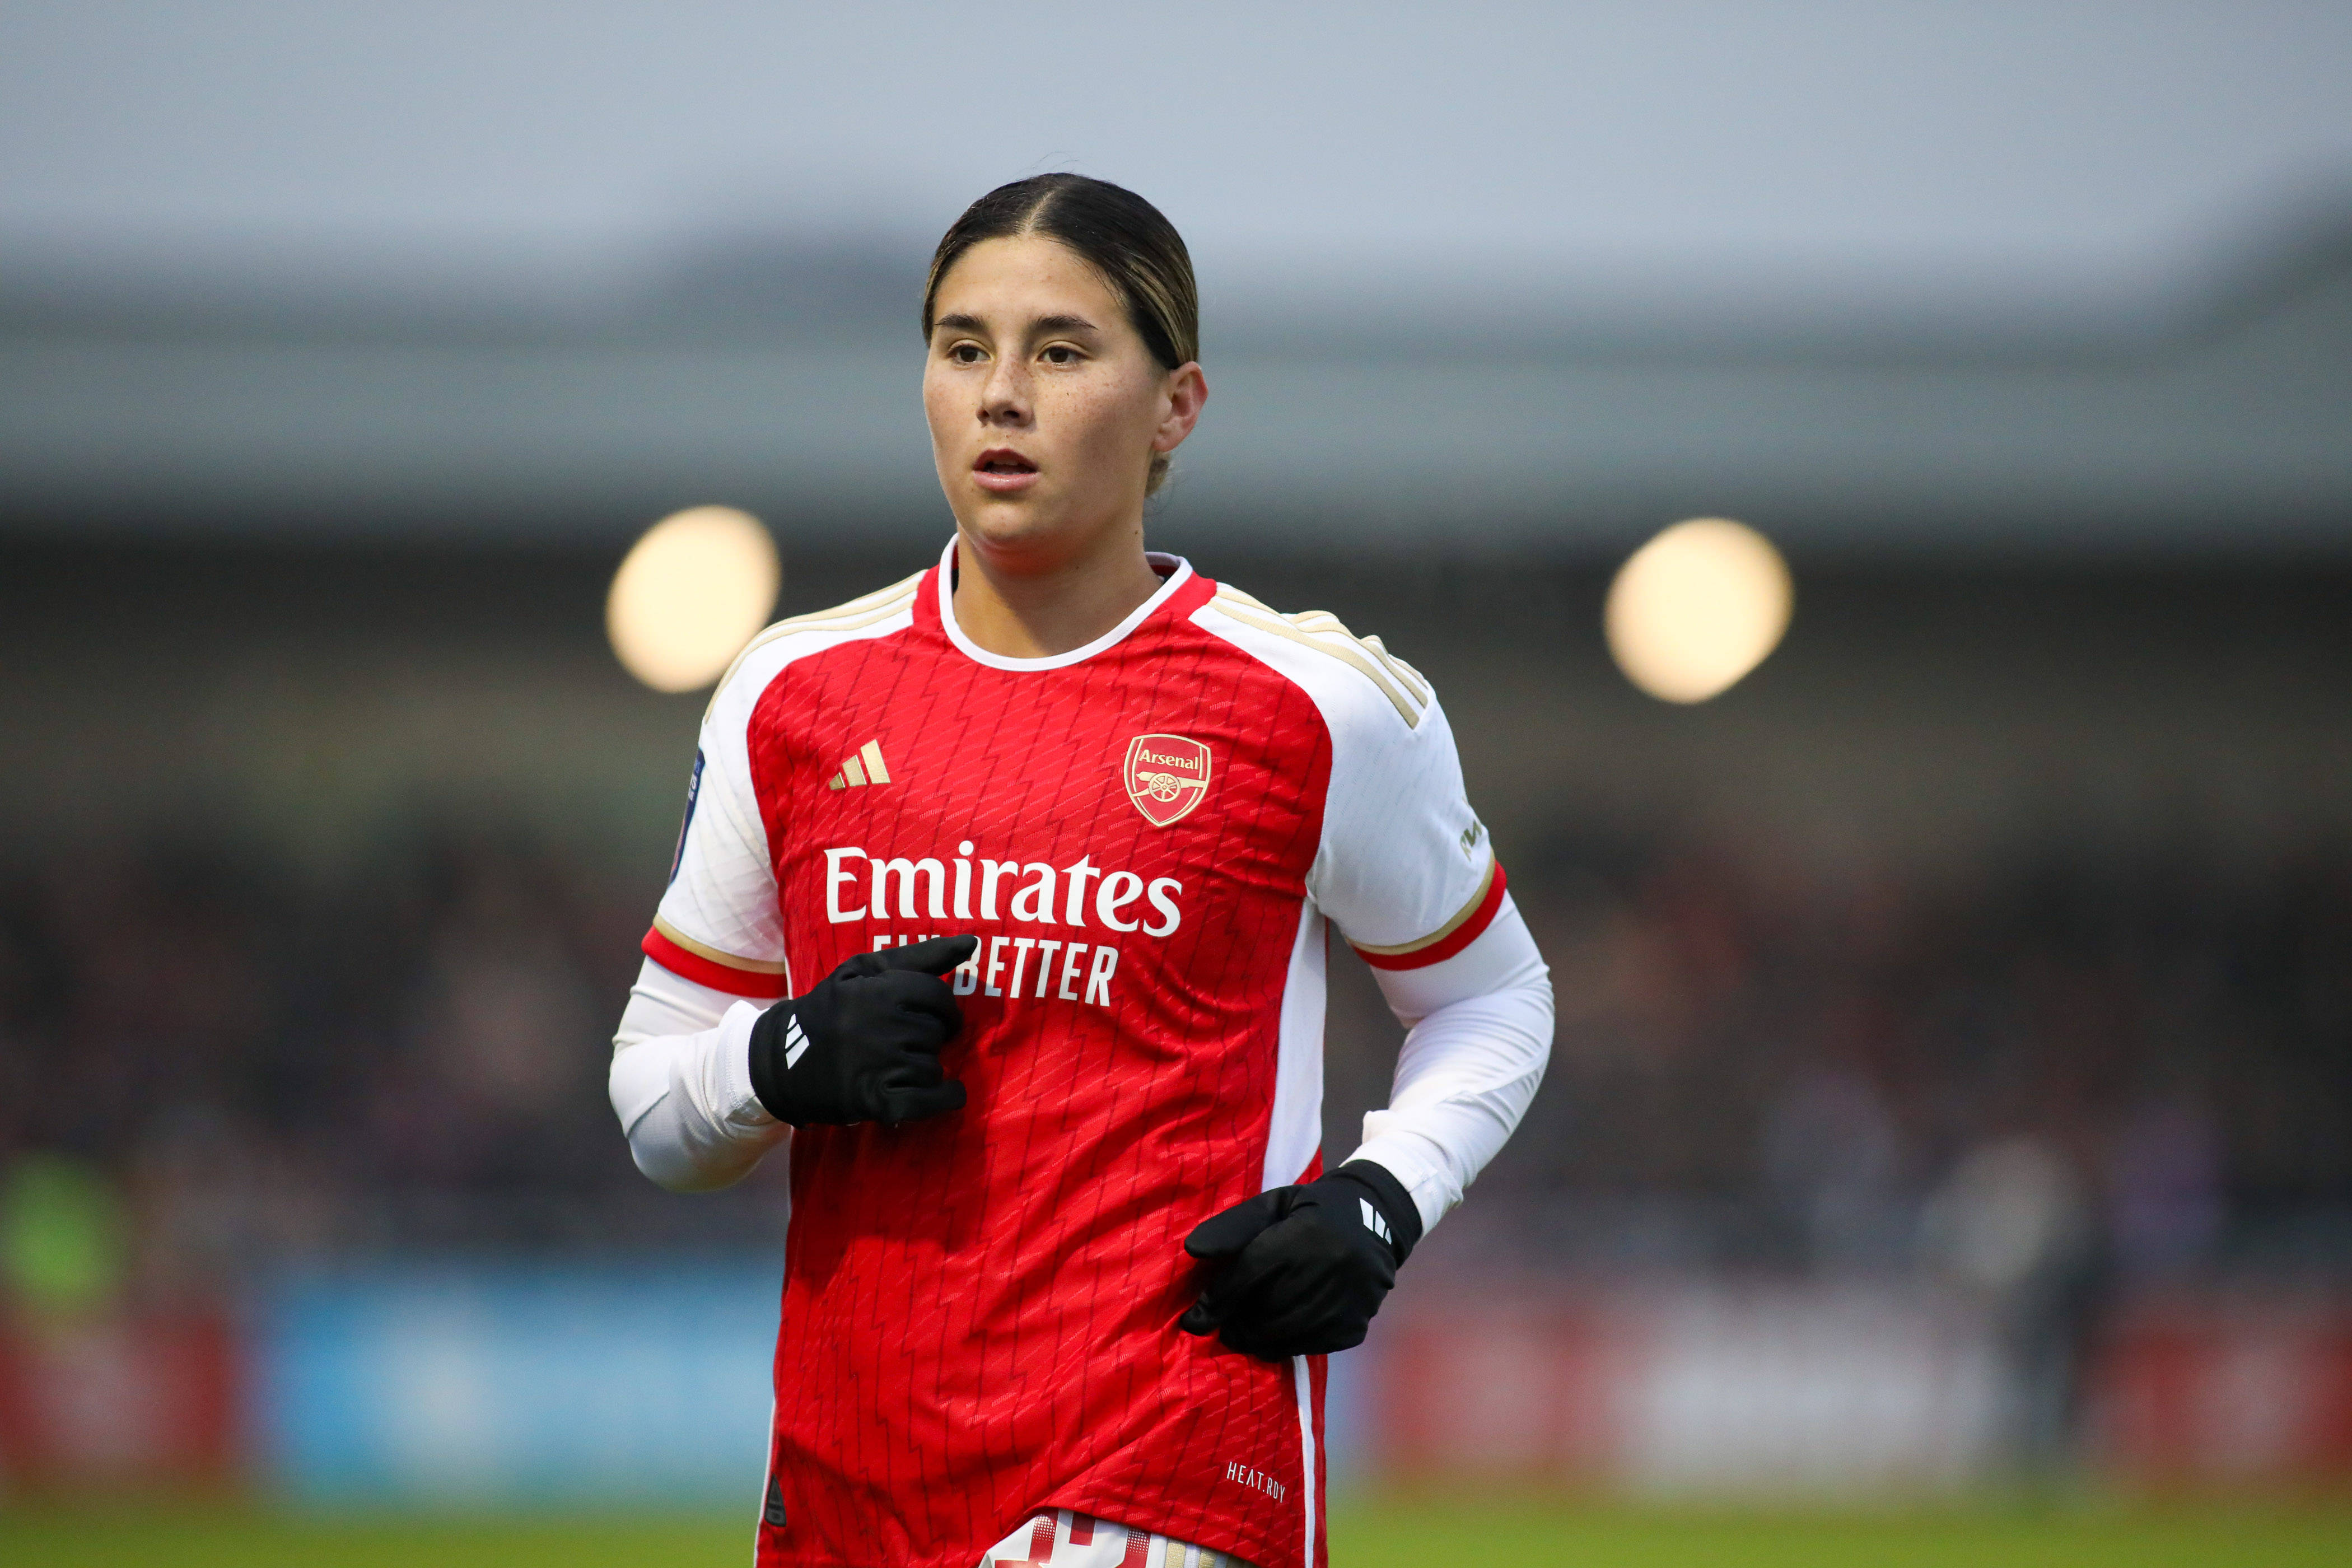 Kyra Cooney-Cross (32 Arsenal) in action during the FA Women s Super League match between Arsenal and West Ham at Meadow Park in London, England (Alexander Canillas / SPP)